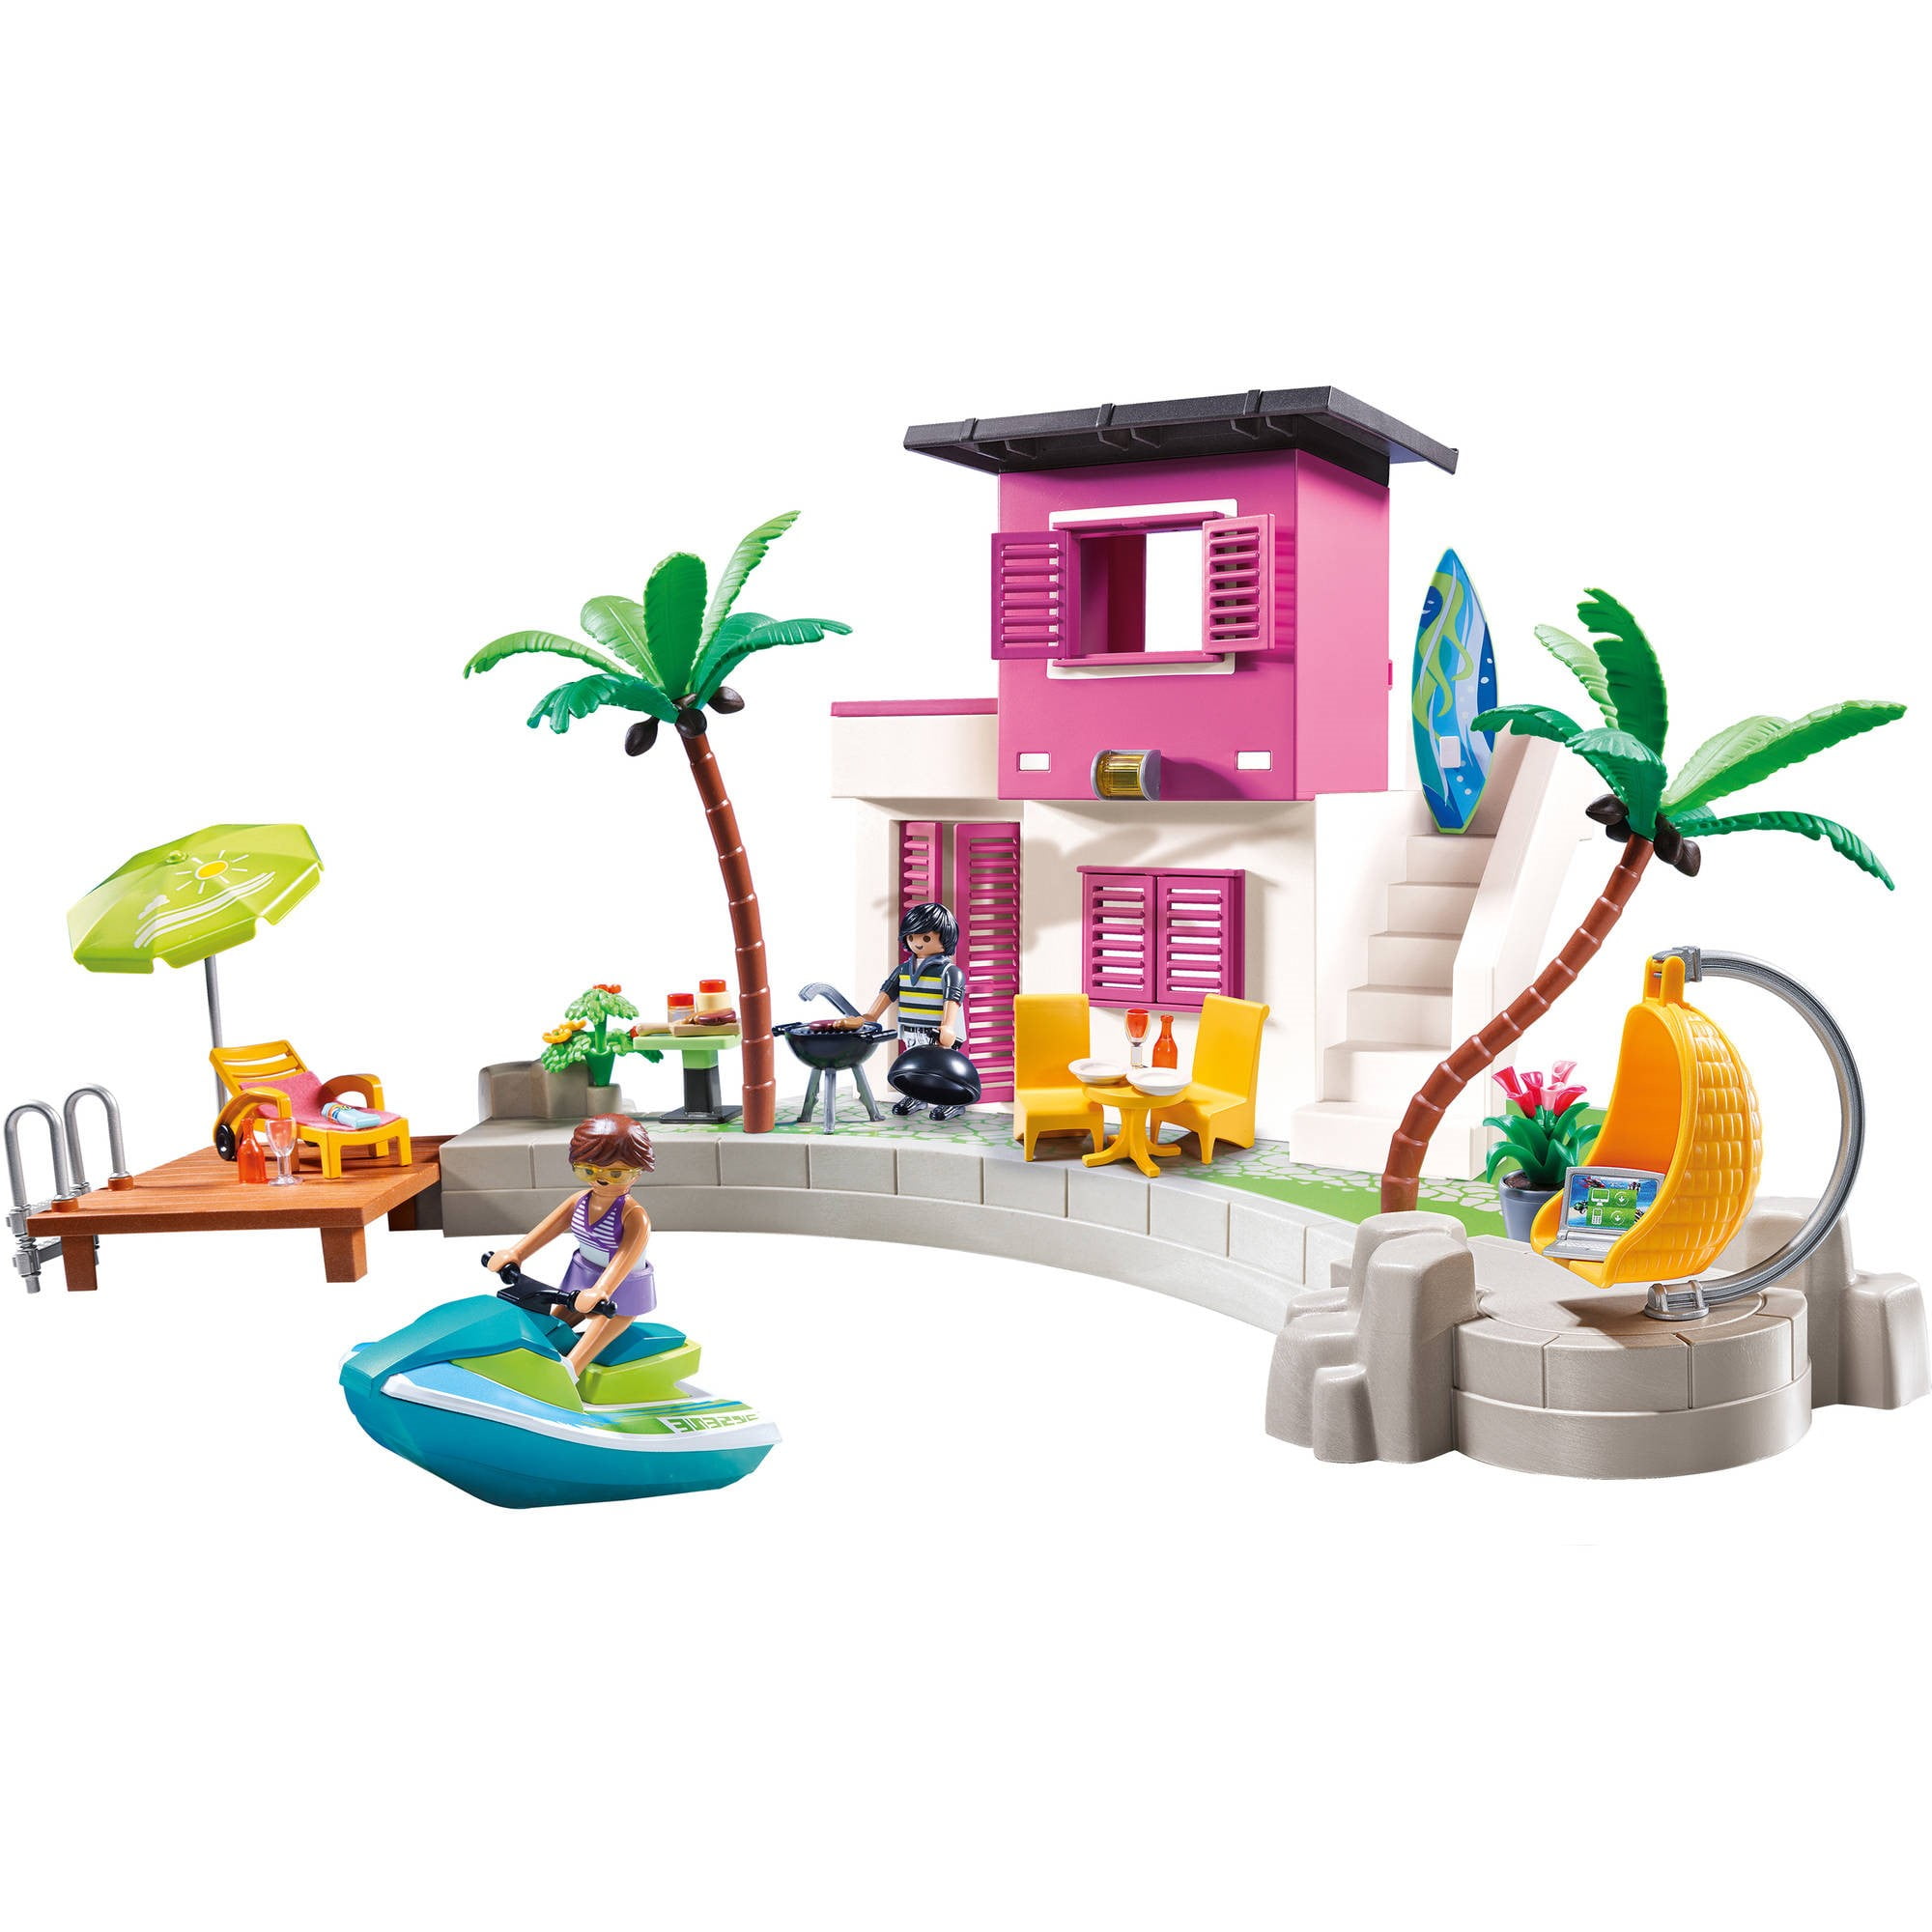 NEW  Playmobil 5636 City Life Luxury Beach House RETIRED  local pick up or SHIP